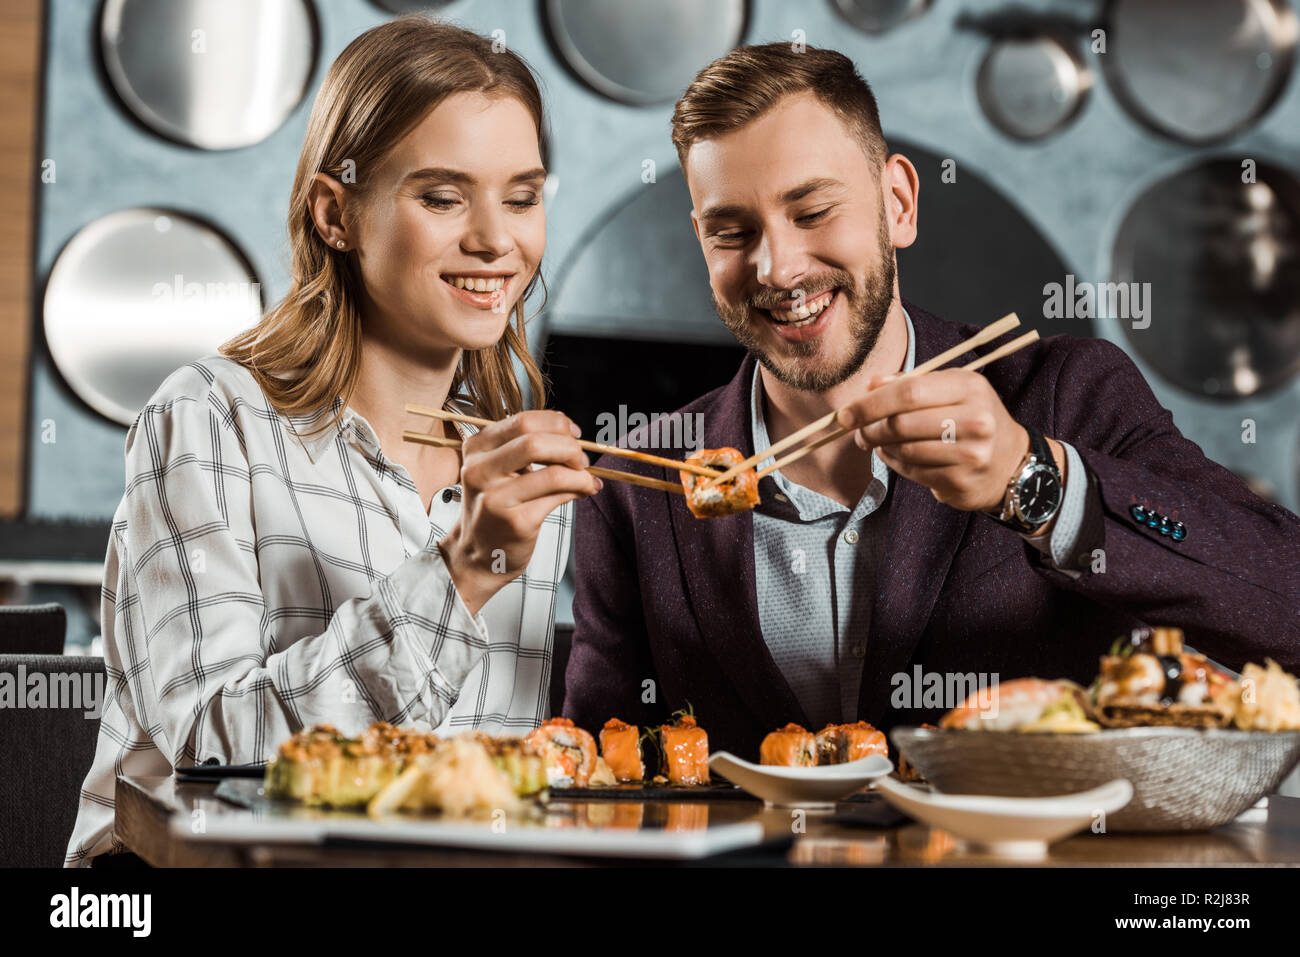 Smiling attractive young adult couple eating sushi together in restaurant Stock Photo